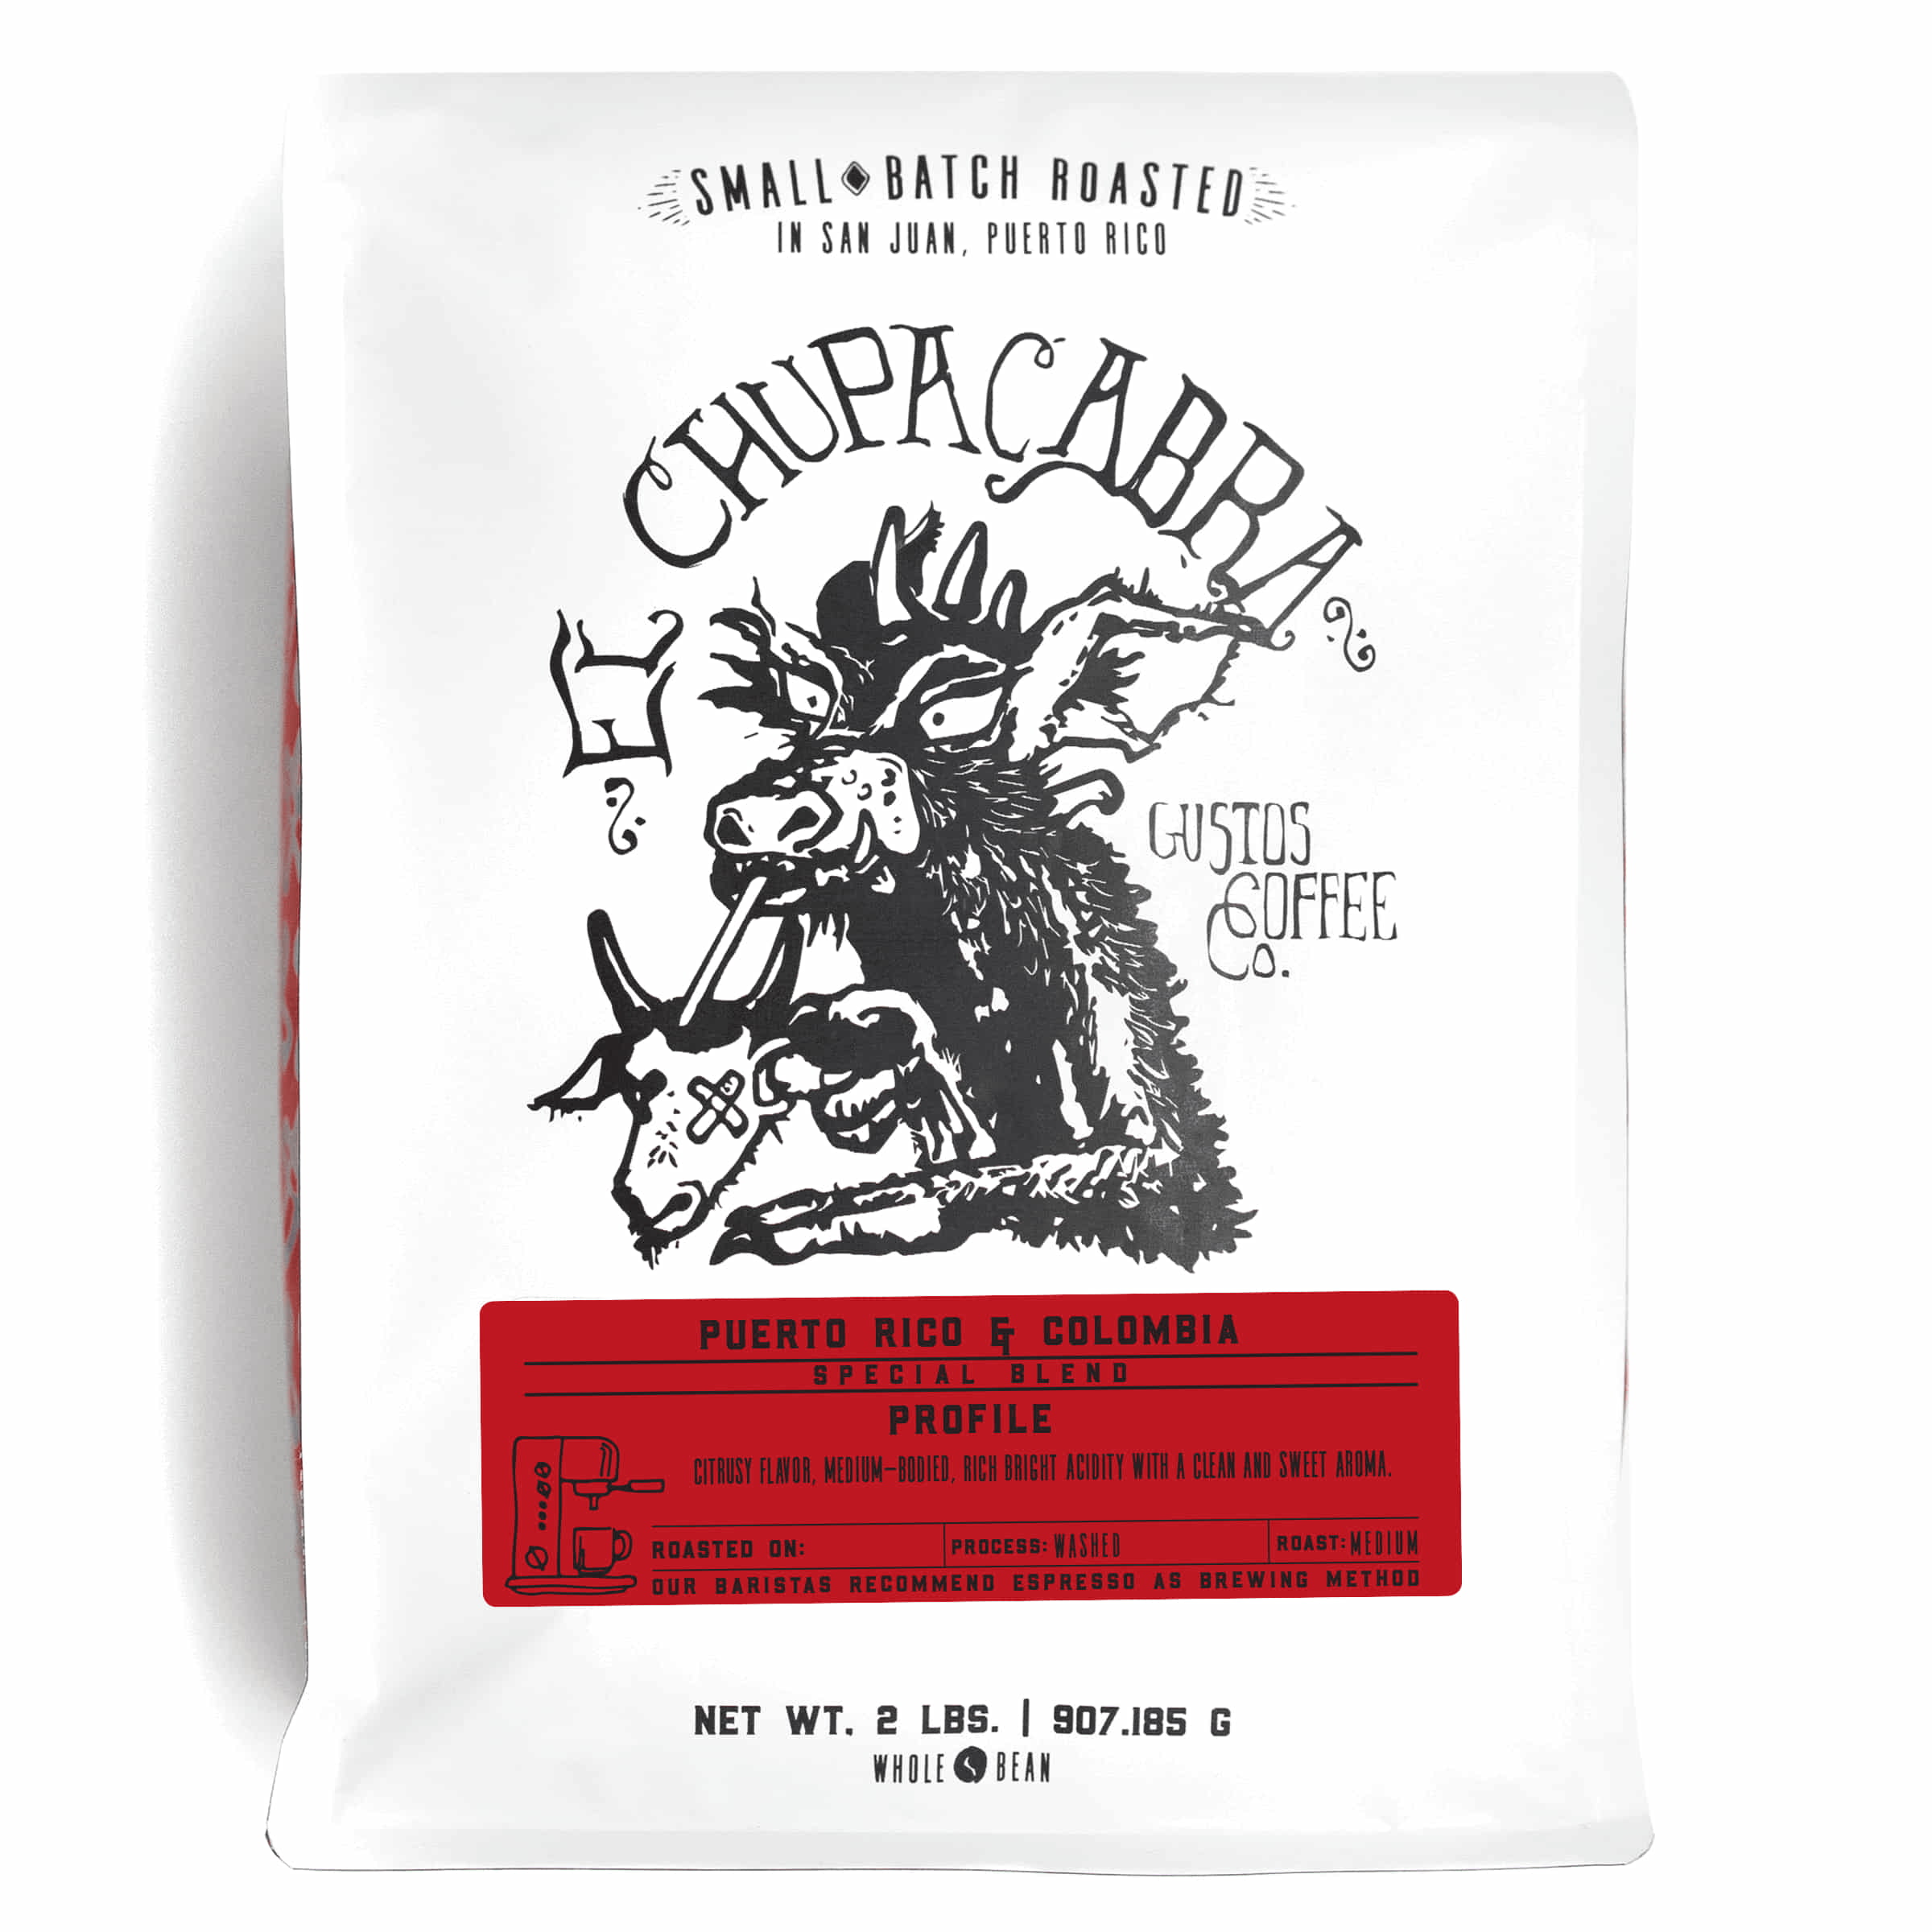 A 2lb bag of Specialty Coffee Blend Puerto Rico and Colombia El Chupacabra by Gustos Coffee Co